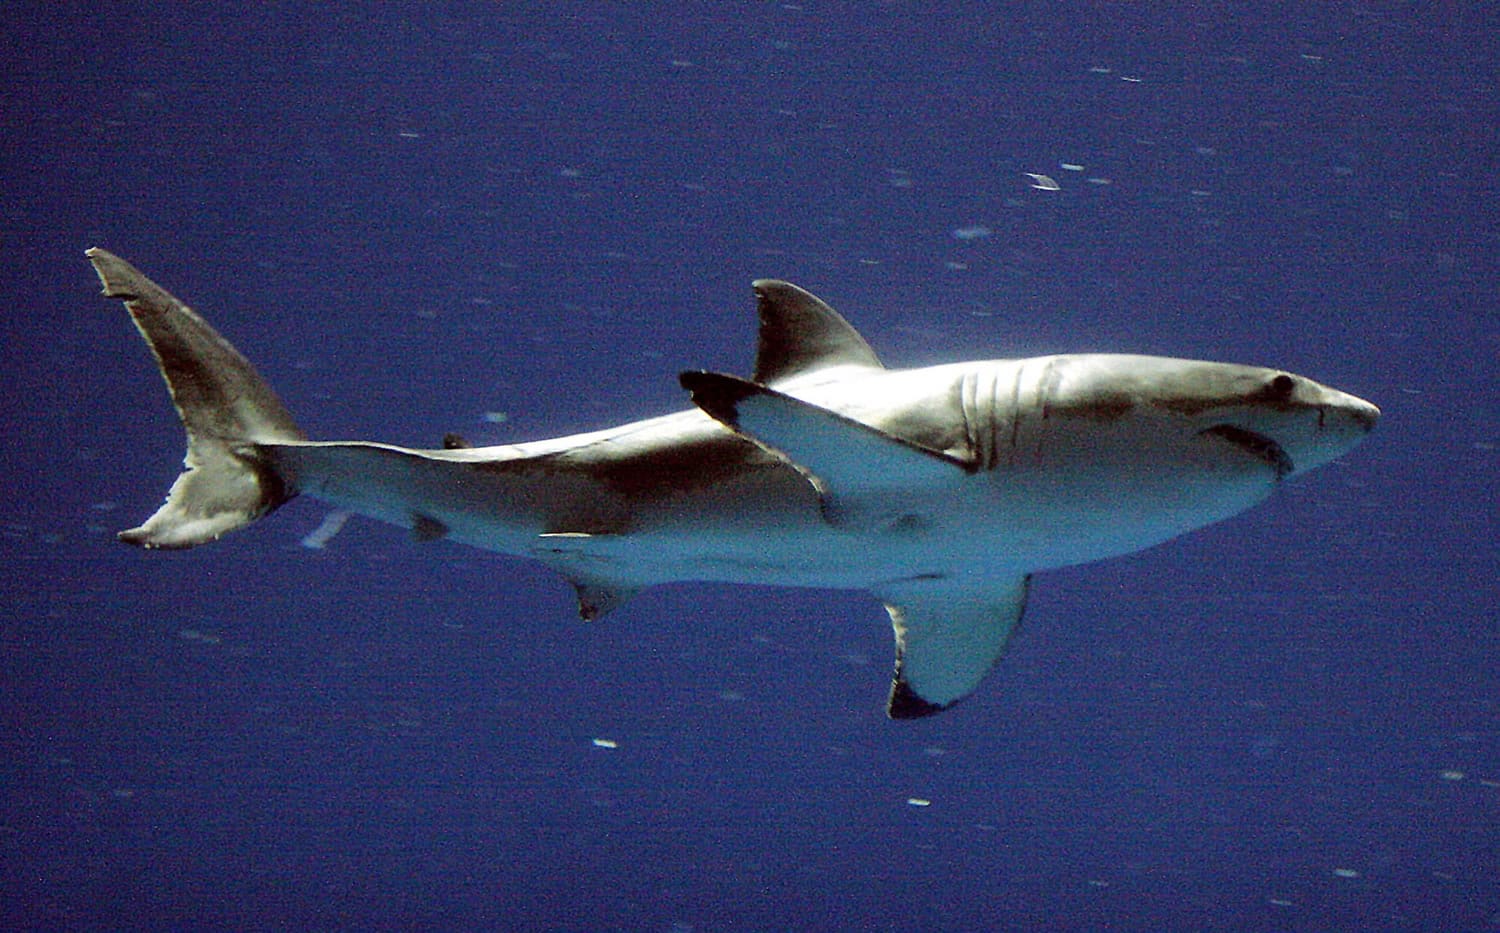 A great white shark swims Sept. 14, 2004, at the Monterey Bay Aquarium's Outer Bay Exhibit in Monterey, Calif.